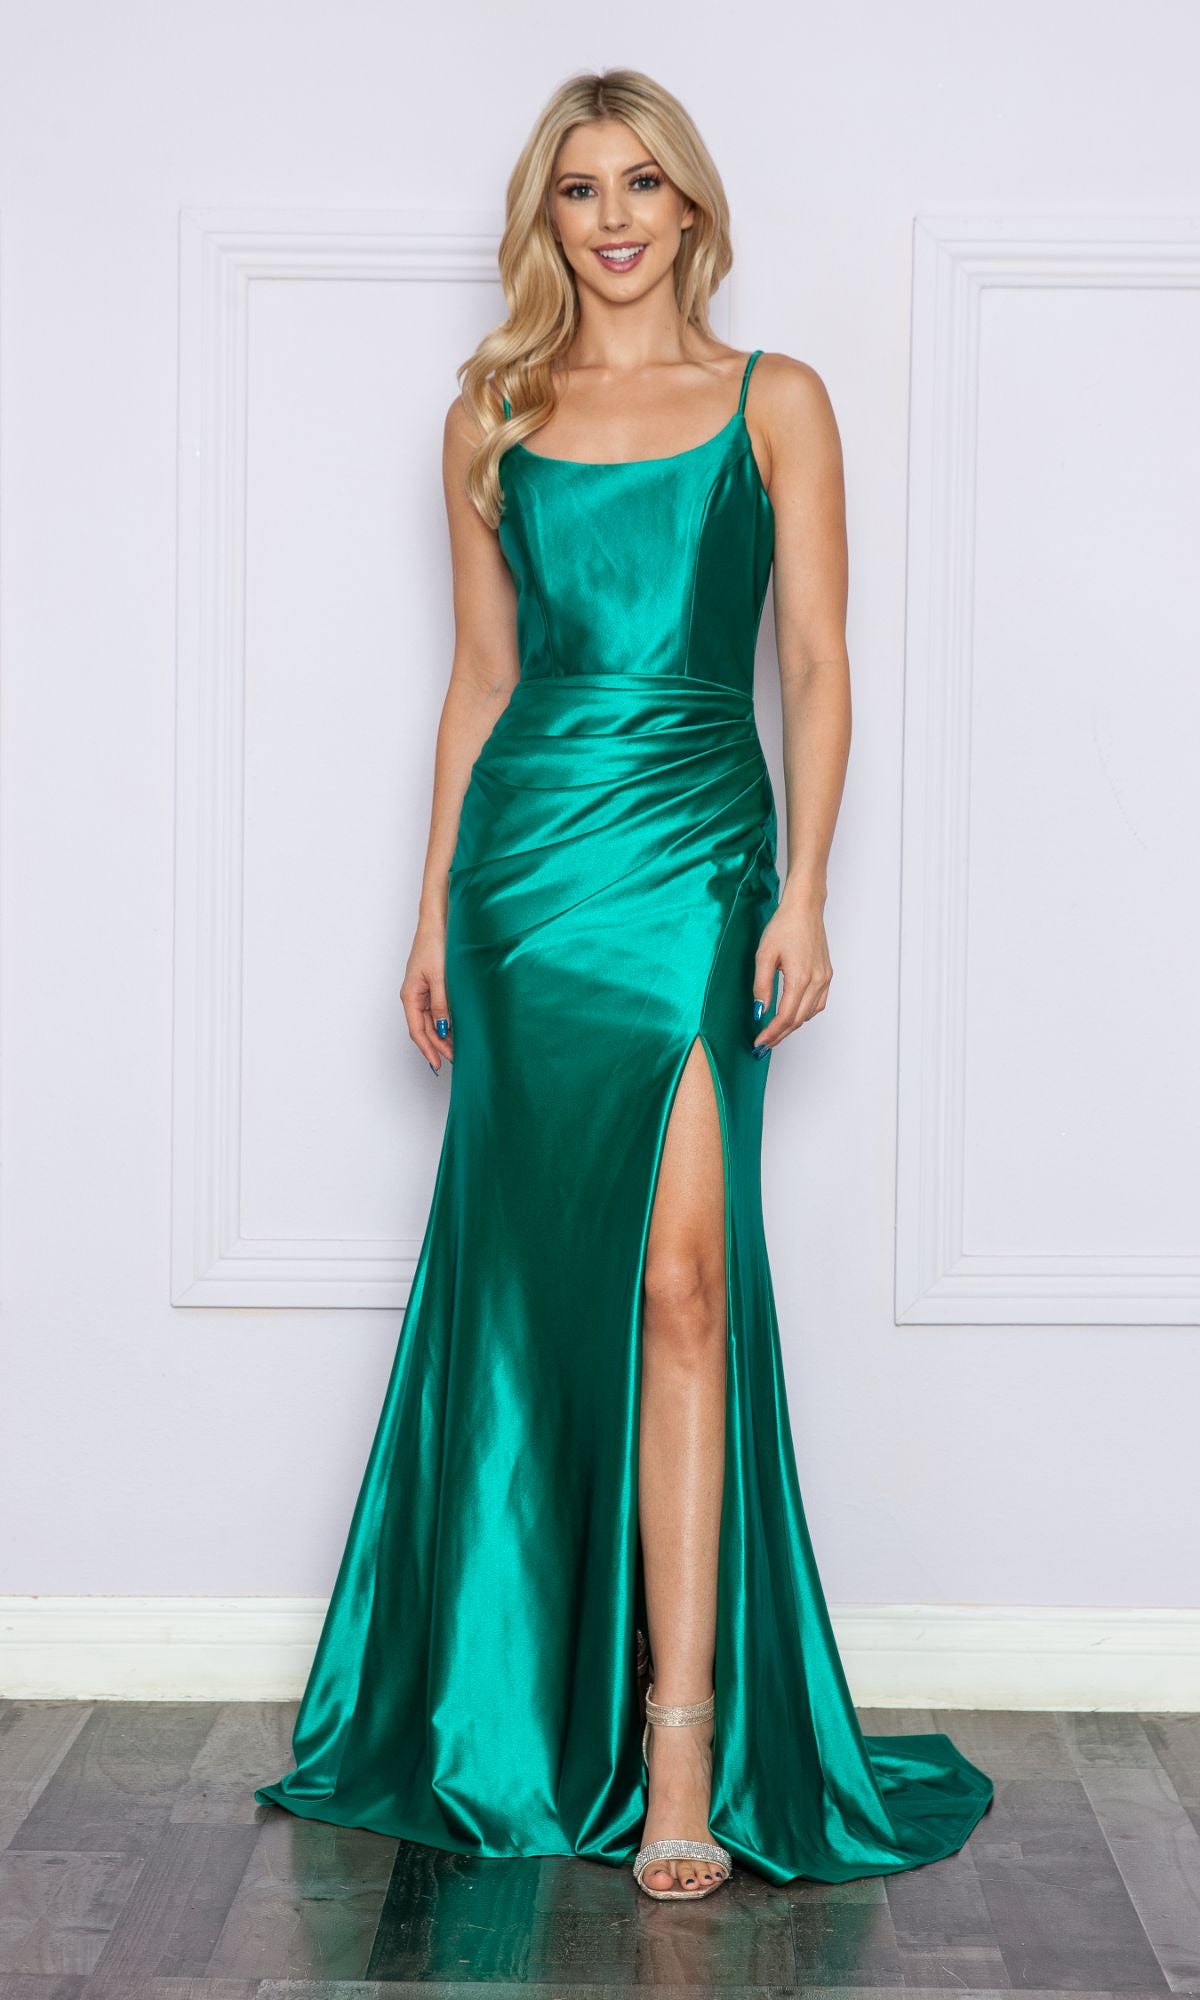 Strappy-Back Long Formal Prom Dress 9250